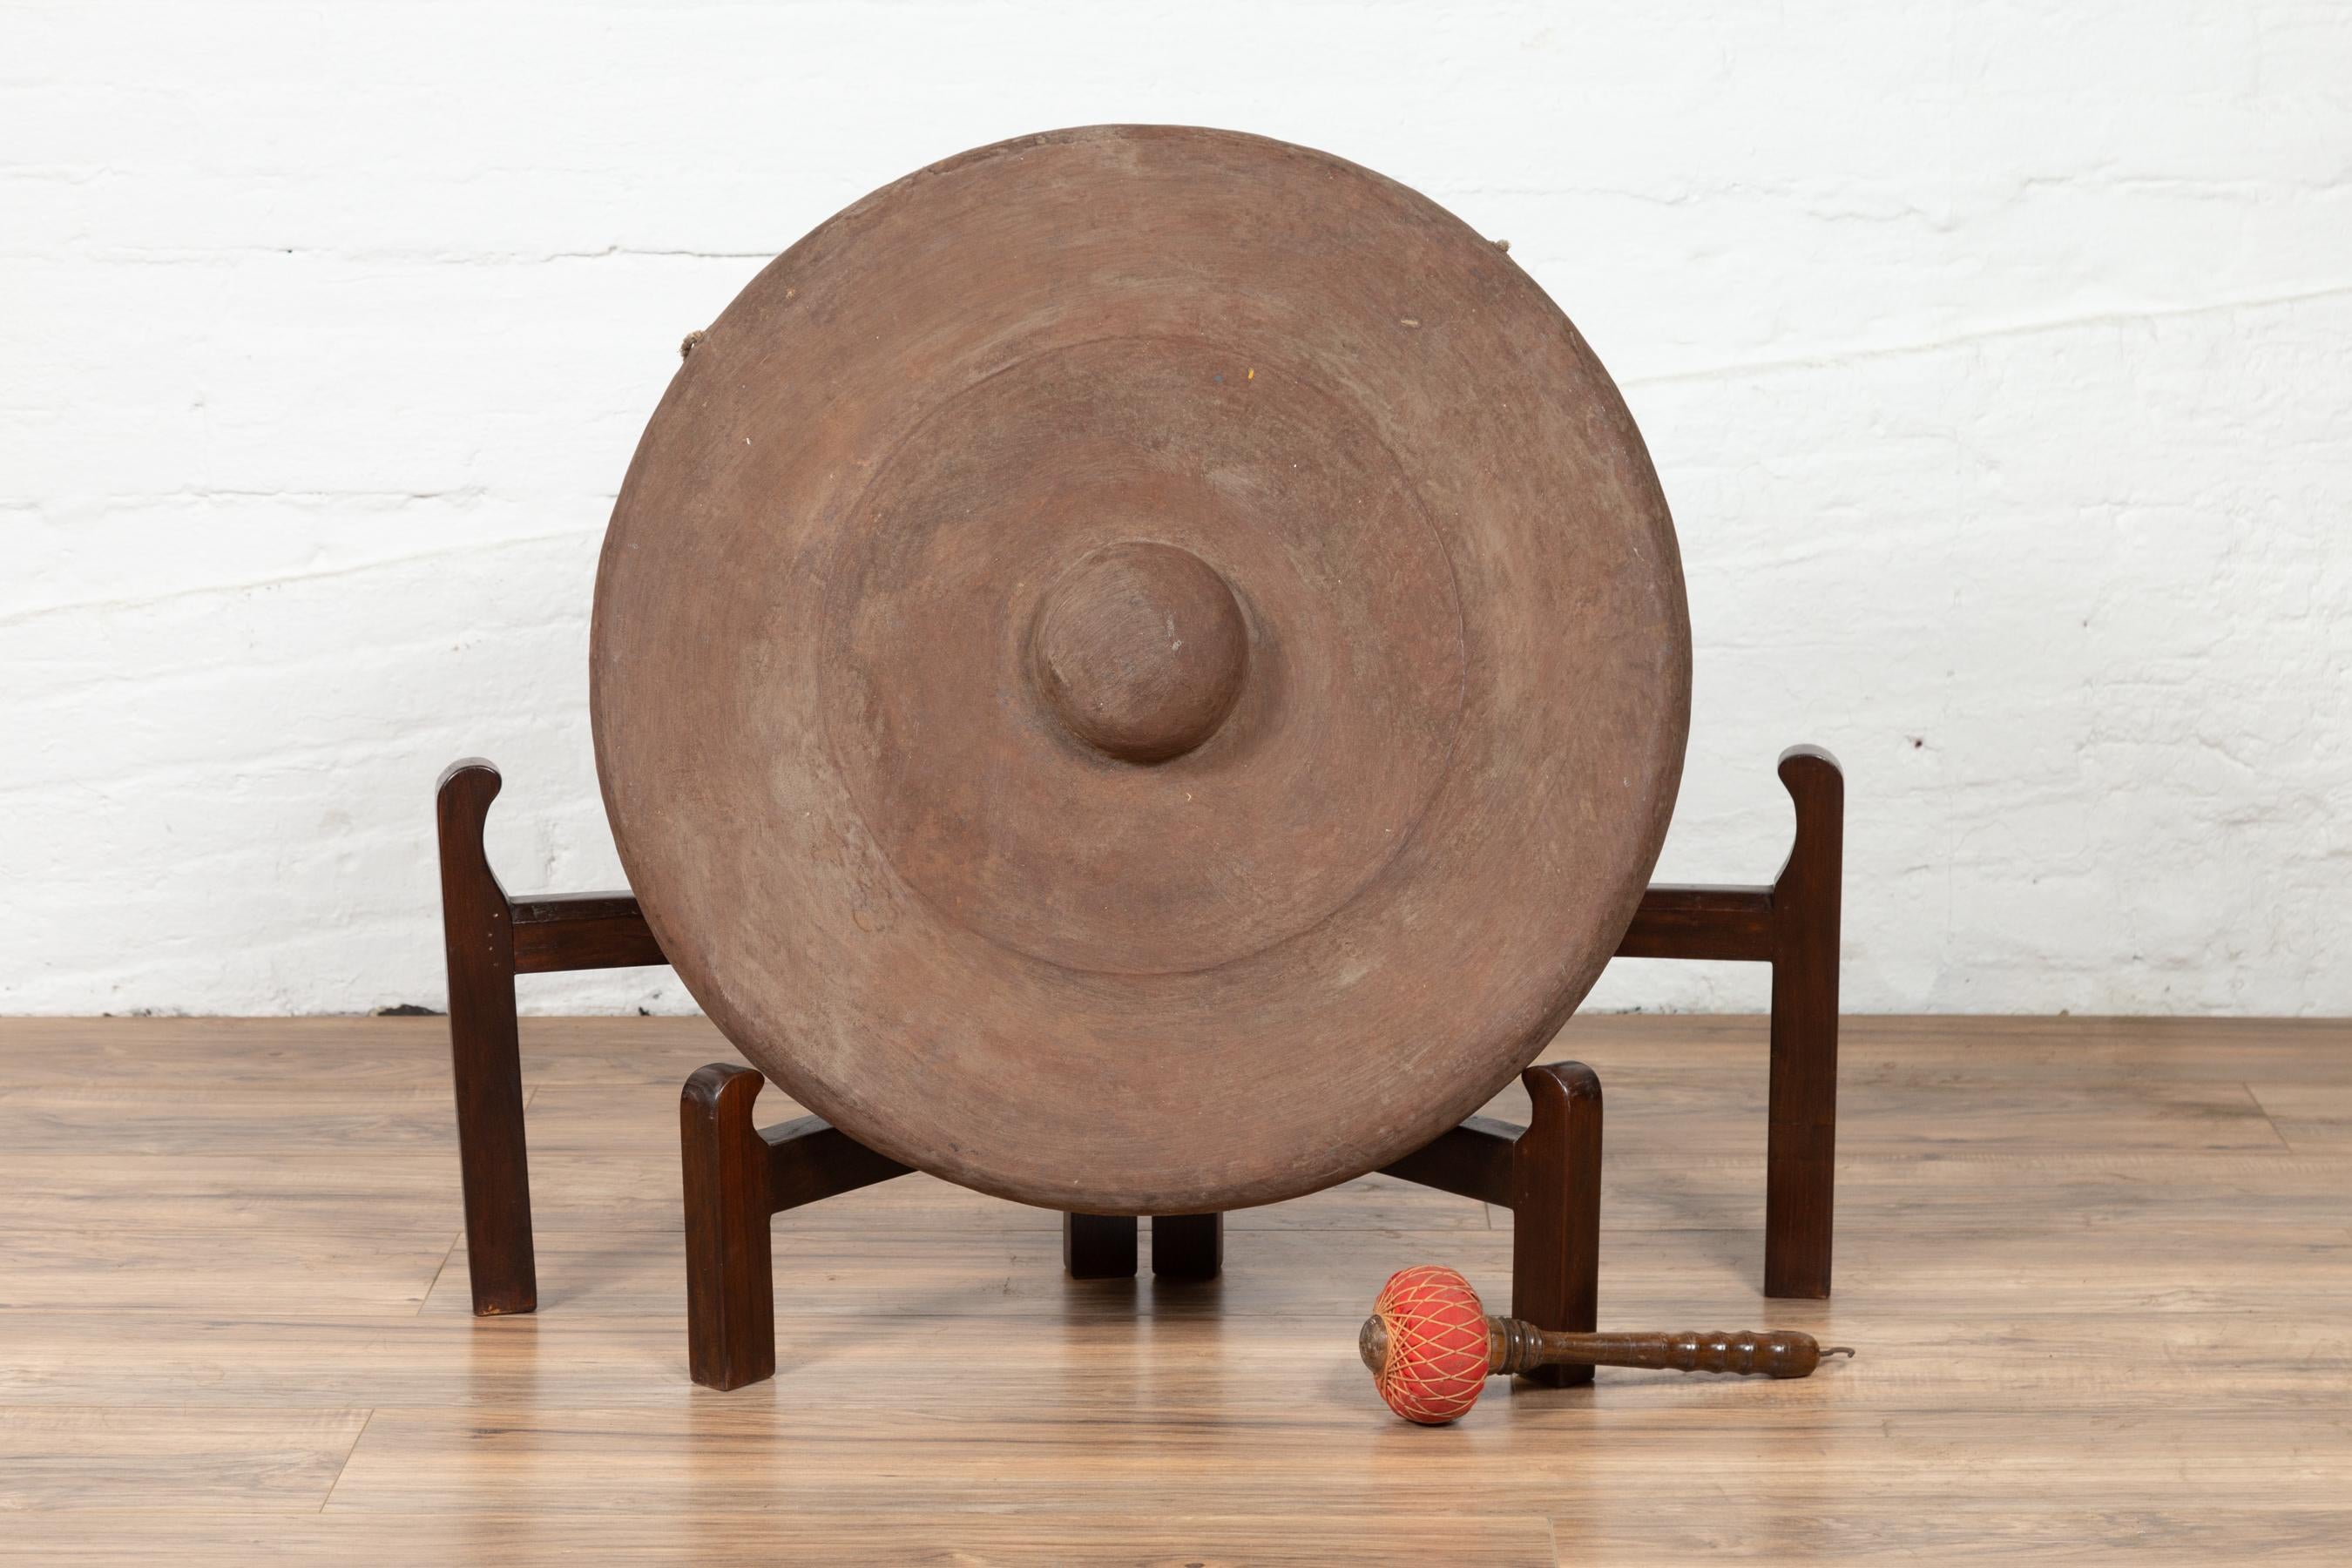 An antique Burmese bronze temple gong with mallet from the early 20th century. Please note that the stand is not included. Born in Burma during the early years of the 20th century, this exquisite bronze temple gong features a traditional circular